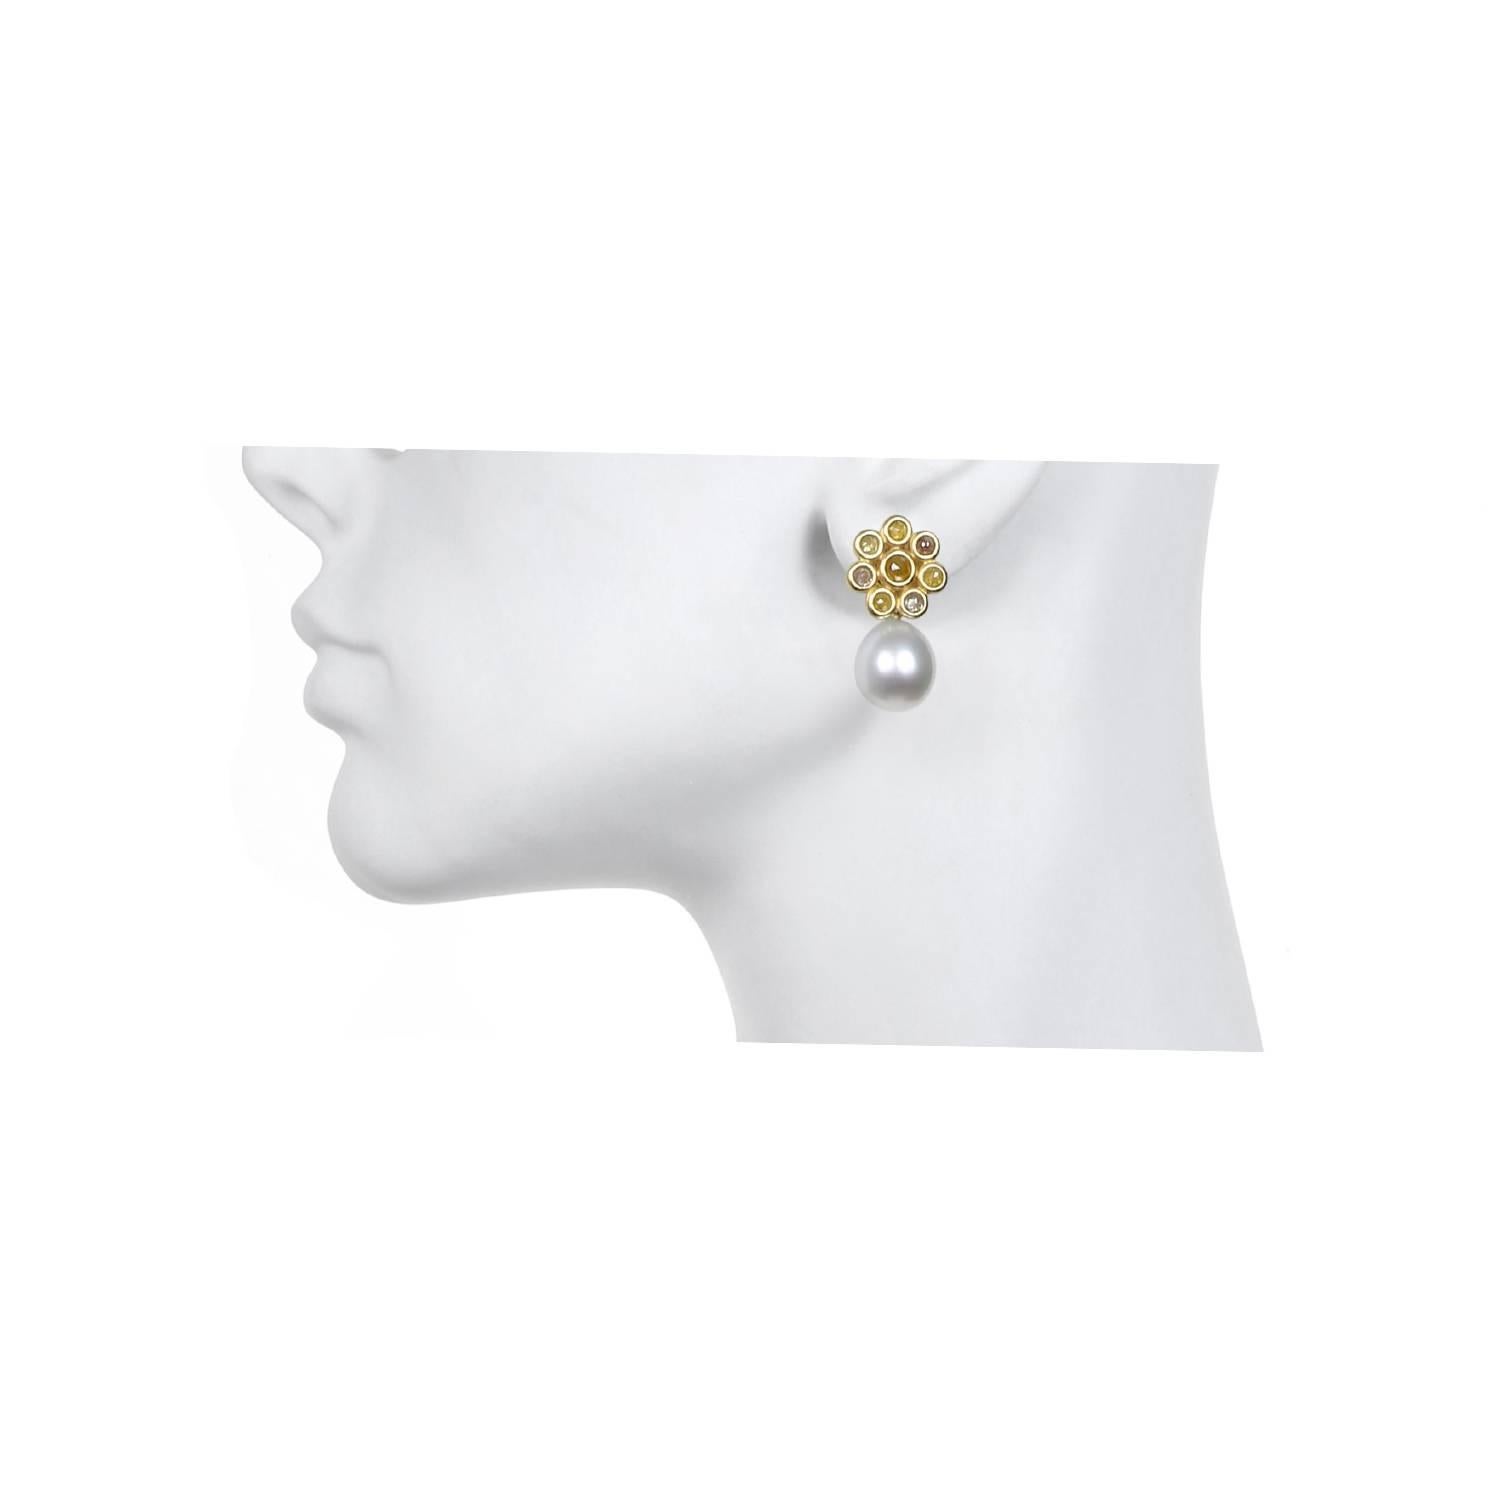 Faye Kim 18K Gold Raw Diamond Daisy Earrings with Golden South Sea Pearl Drops For Sale 2